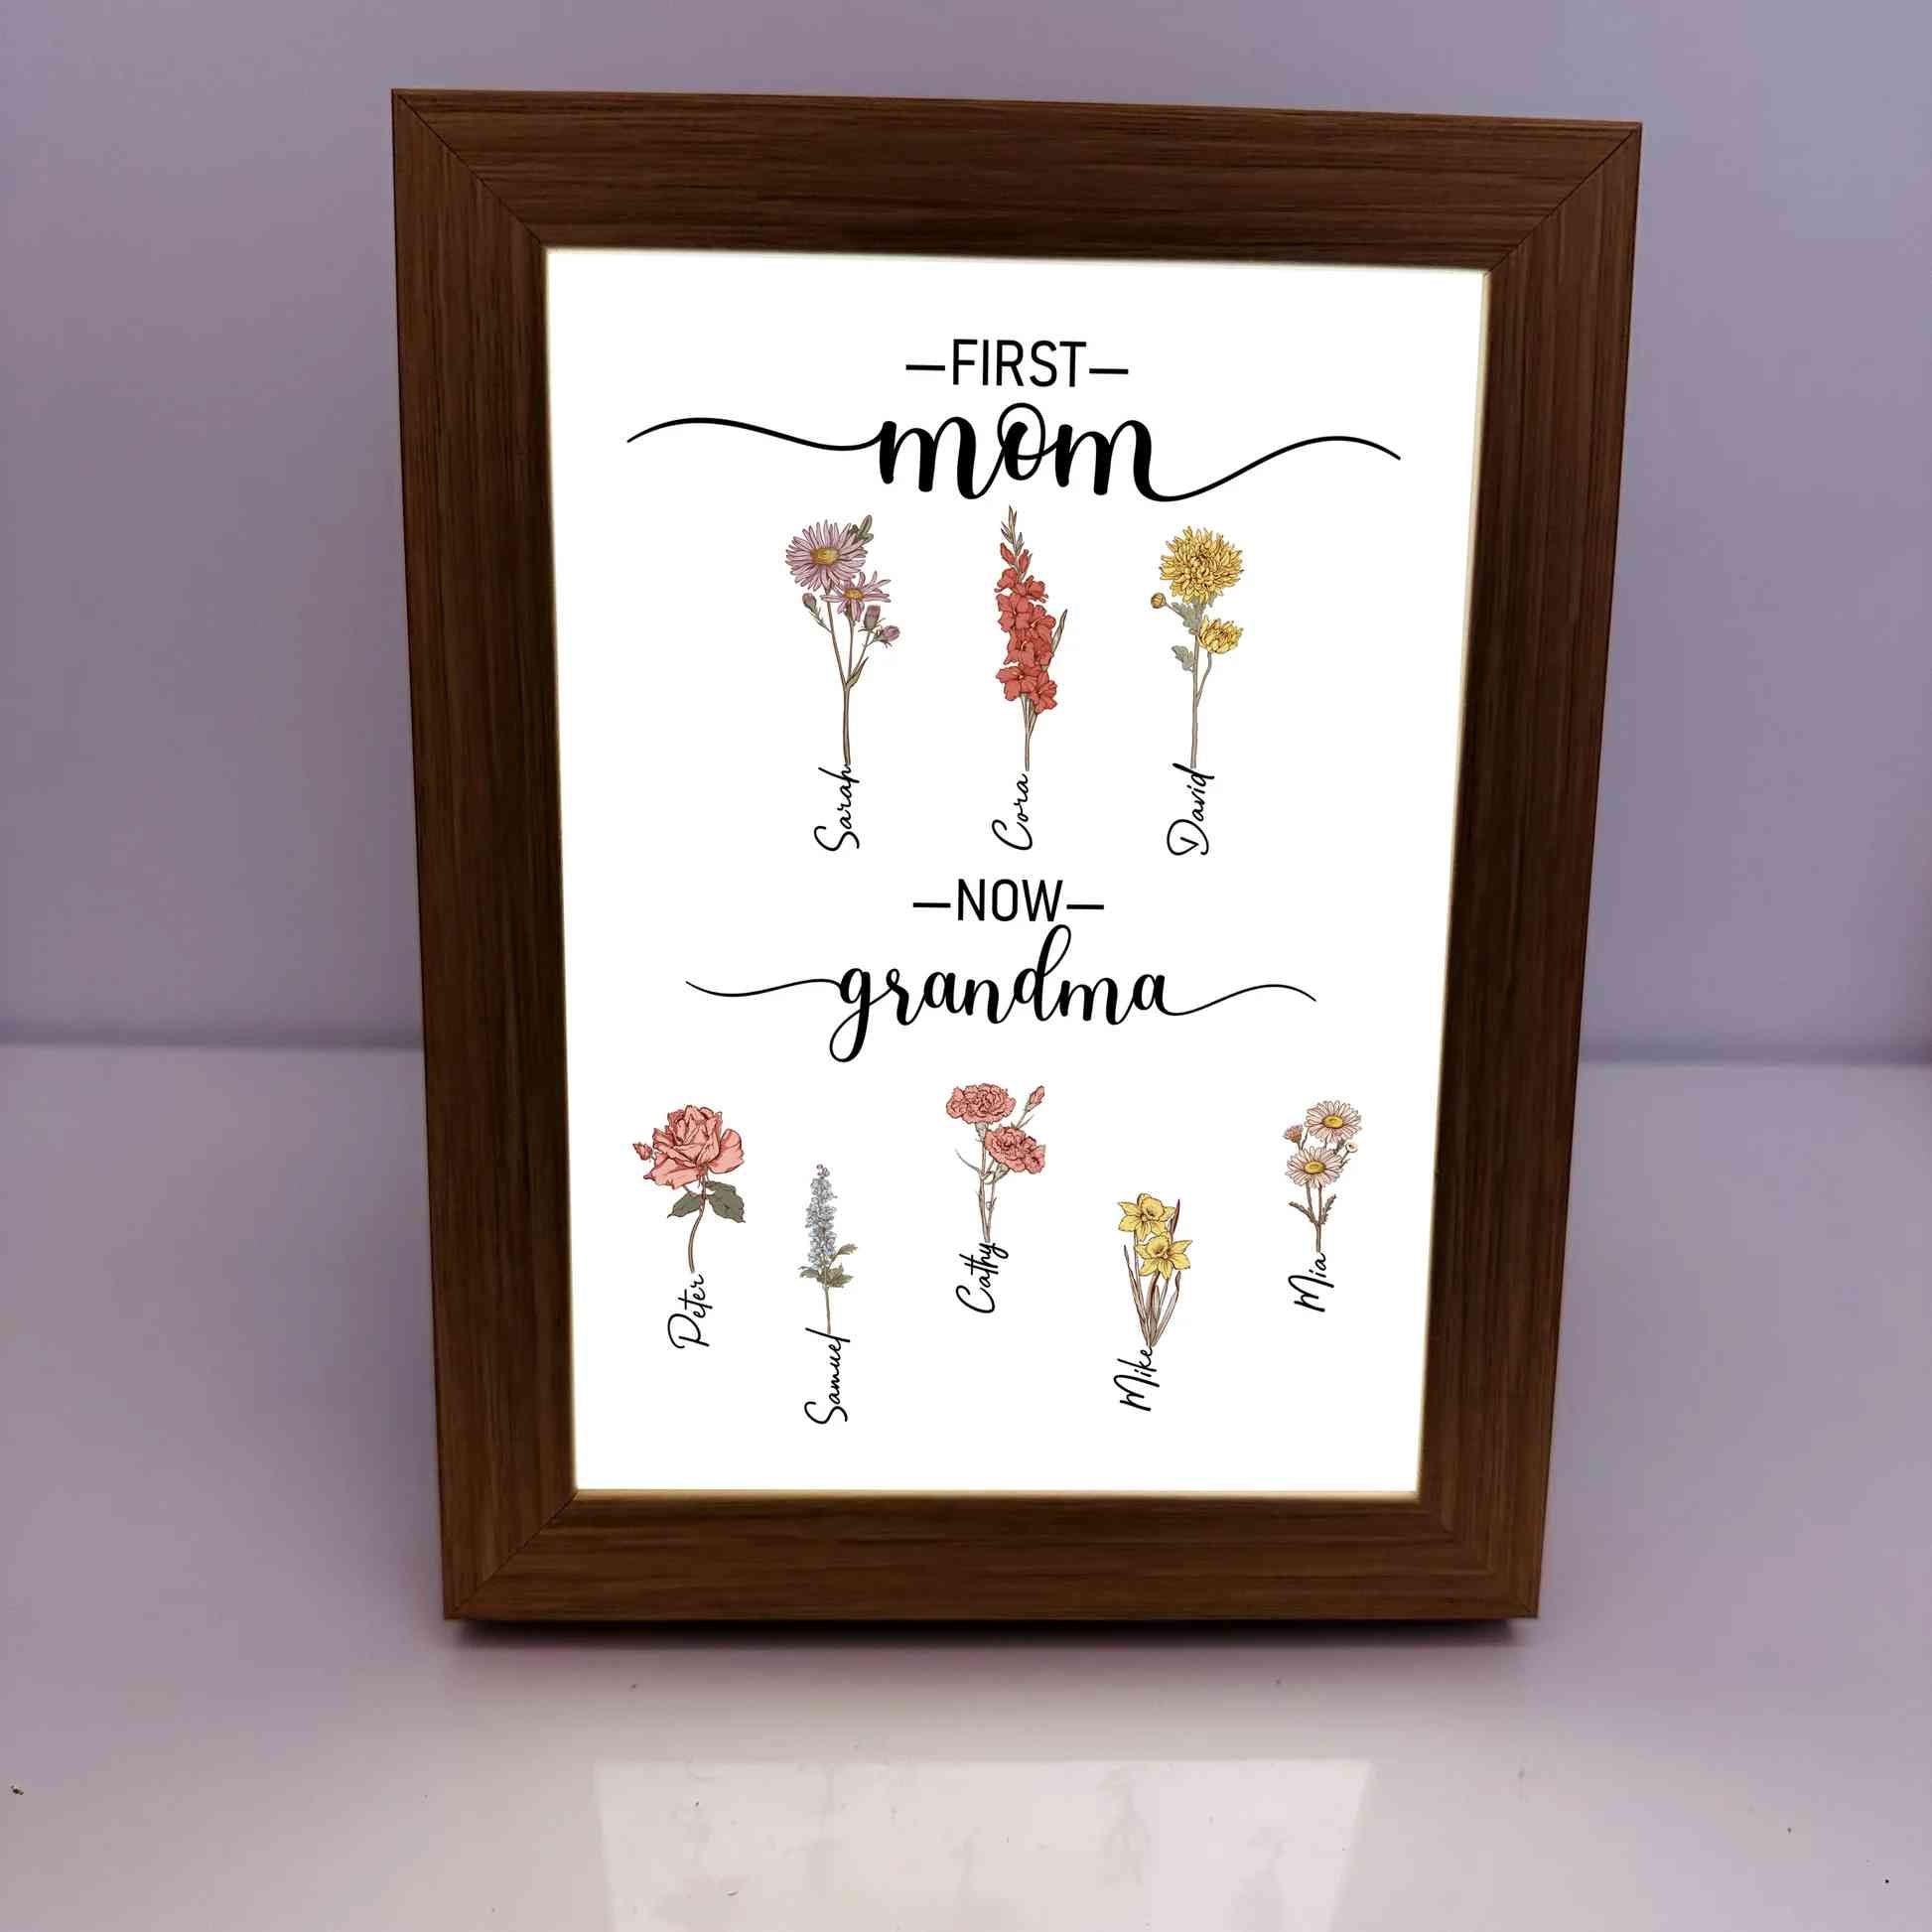 First Mom Now Grandma - Personalized LED Light Box